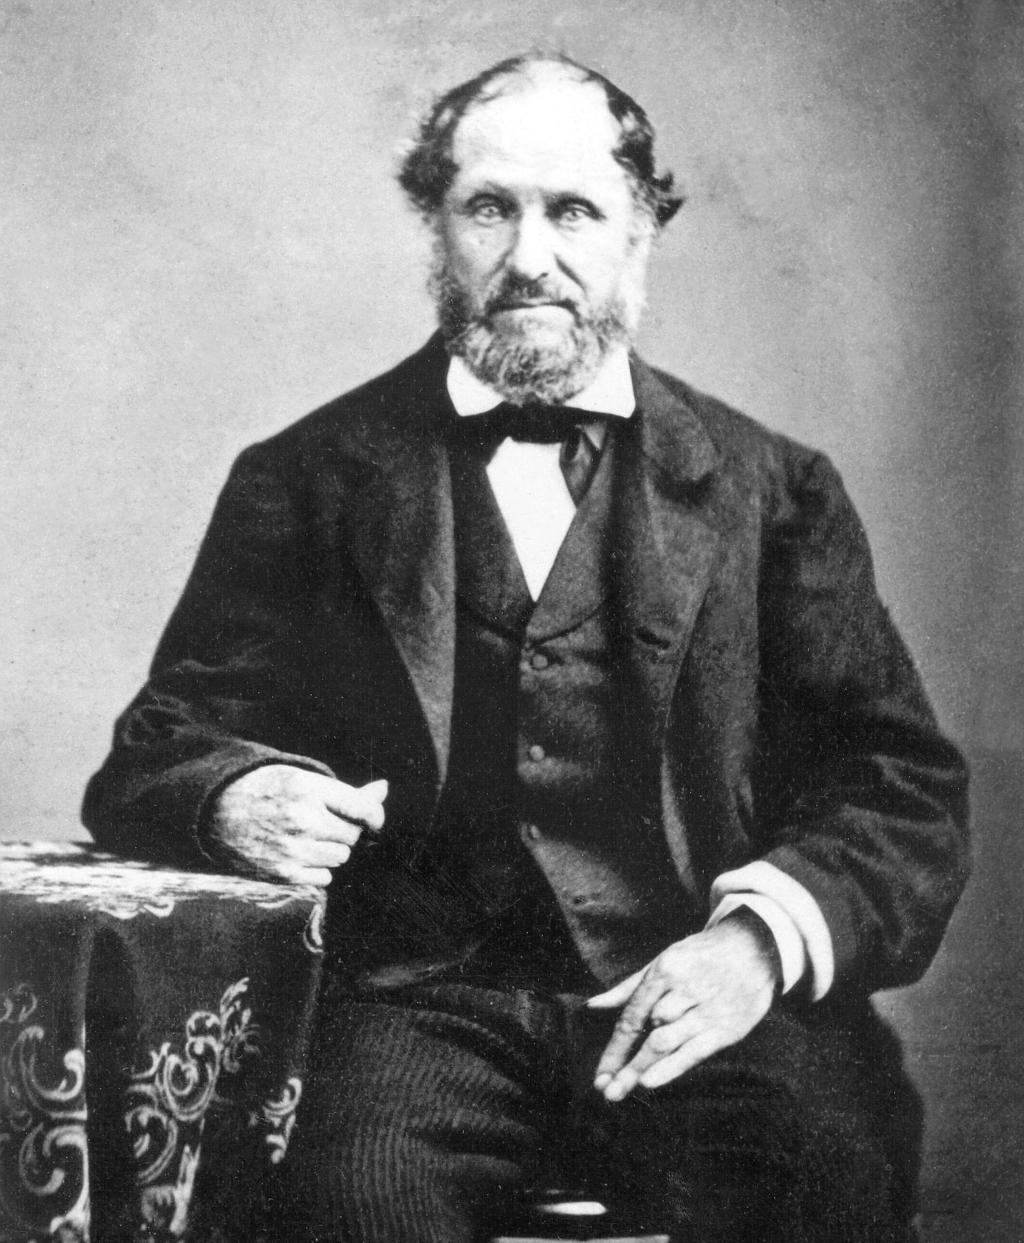 John W. Stevenson, pioneer of Cape Horn of 1853. His homestead was at the base of Cape Horn along the Columbia River, and is still in the family.